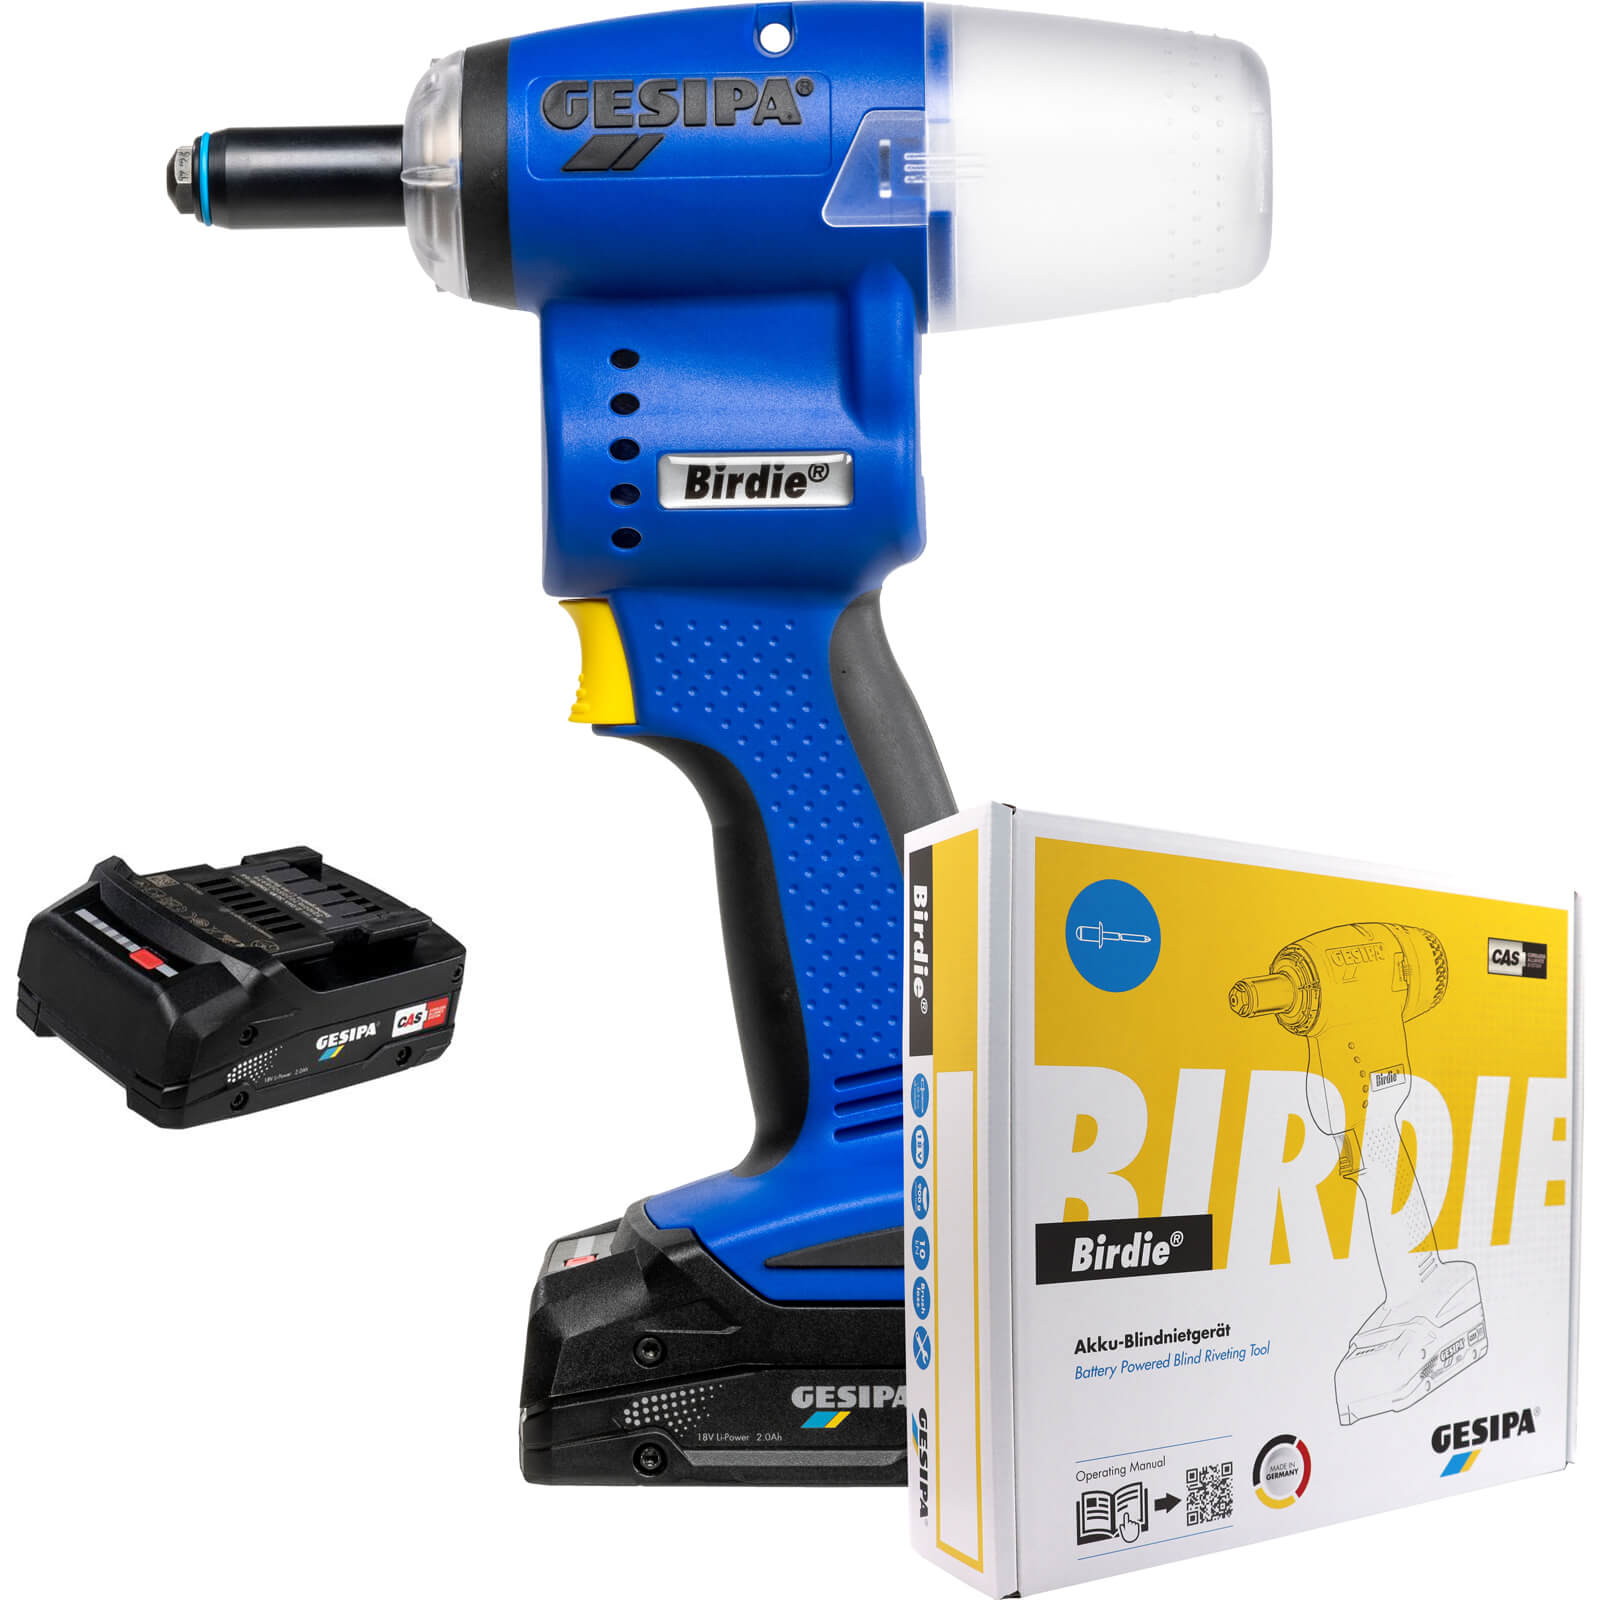 Image of Gesipa Birdie 18v Cordless Brushless Riveter Tool 2 x 2ah Li-ion Charger No Case